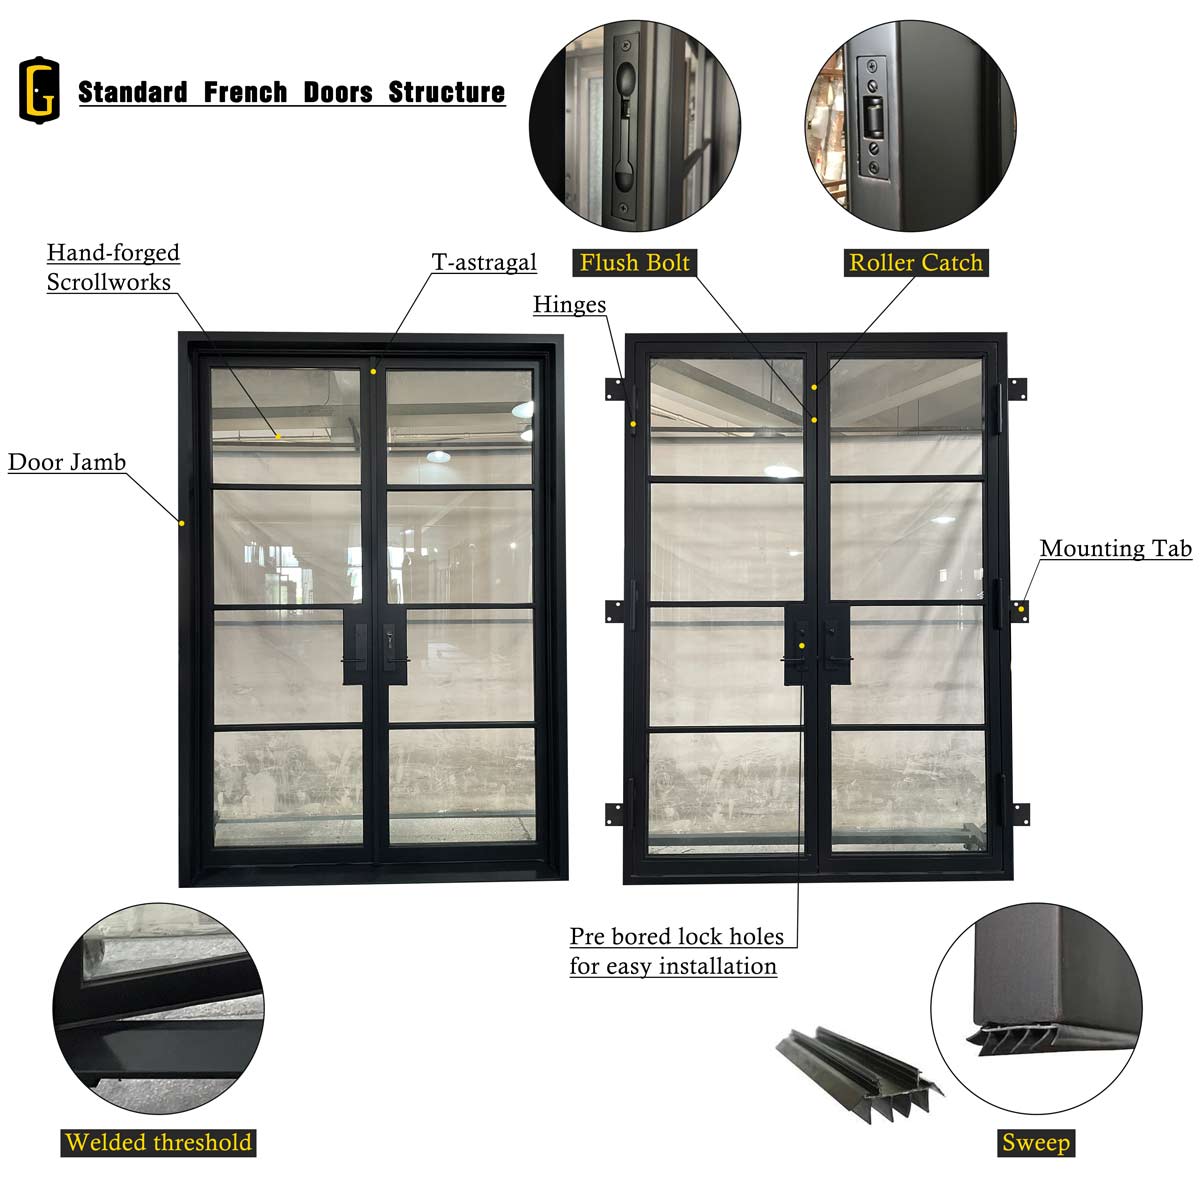 GID Thermal Break  Iron French Single Door With Two Sidelights And Transom TFD311